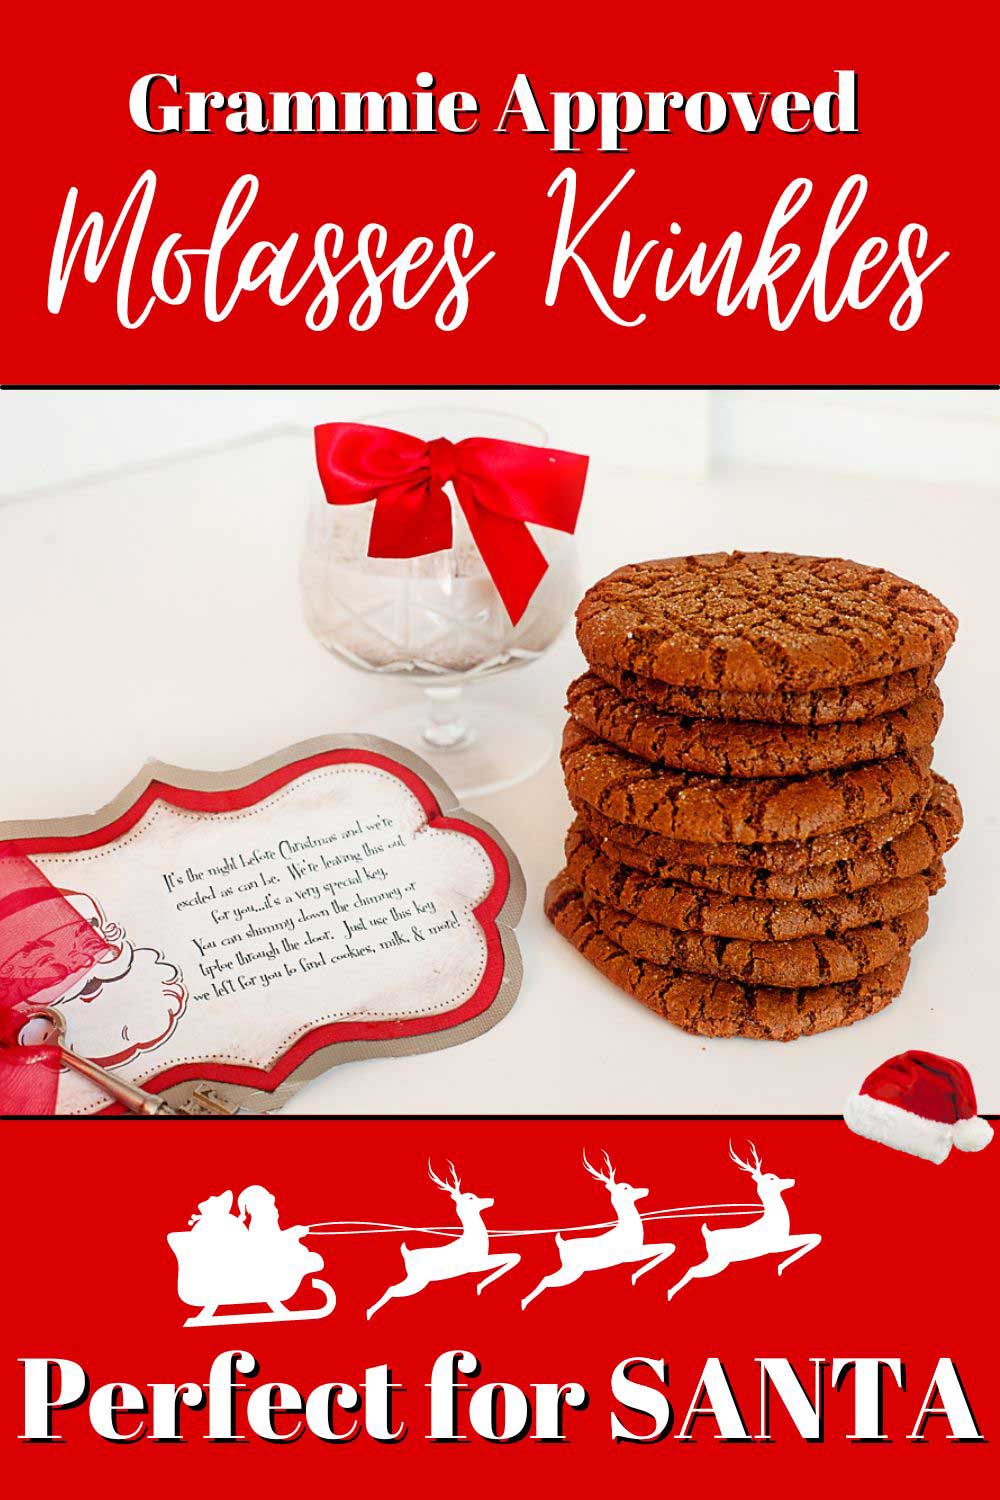 These incredible Gluten Free Cookies are sure to be a family favourite! They are delicious any time of the year! gluten free cookies, gfcookies, gfvegancookies, gluten free baking, gluten free molasses crinkles, gluten free ginger cookies. Christmas baking, molasses cookies, molasses cookie recipe, molasses crinkles recipe, cookies for santa, gluten free Christmas, gluten free christmas cookies, gluten free cookies for Santa, cookies for Santa